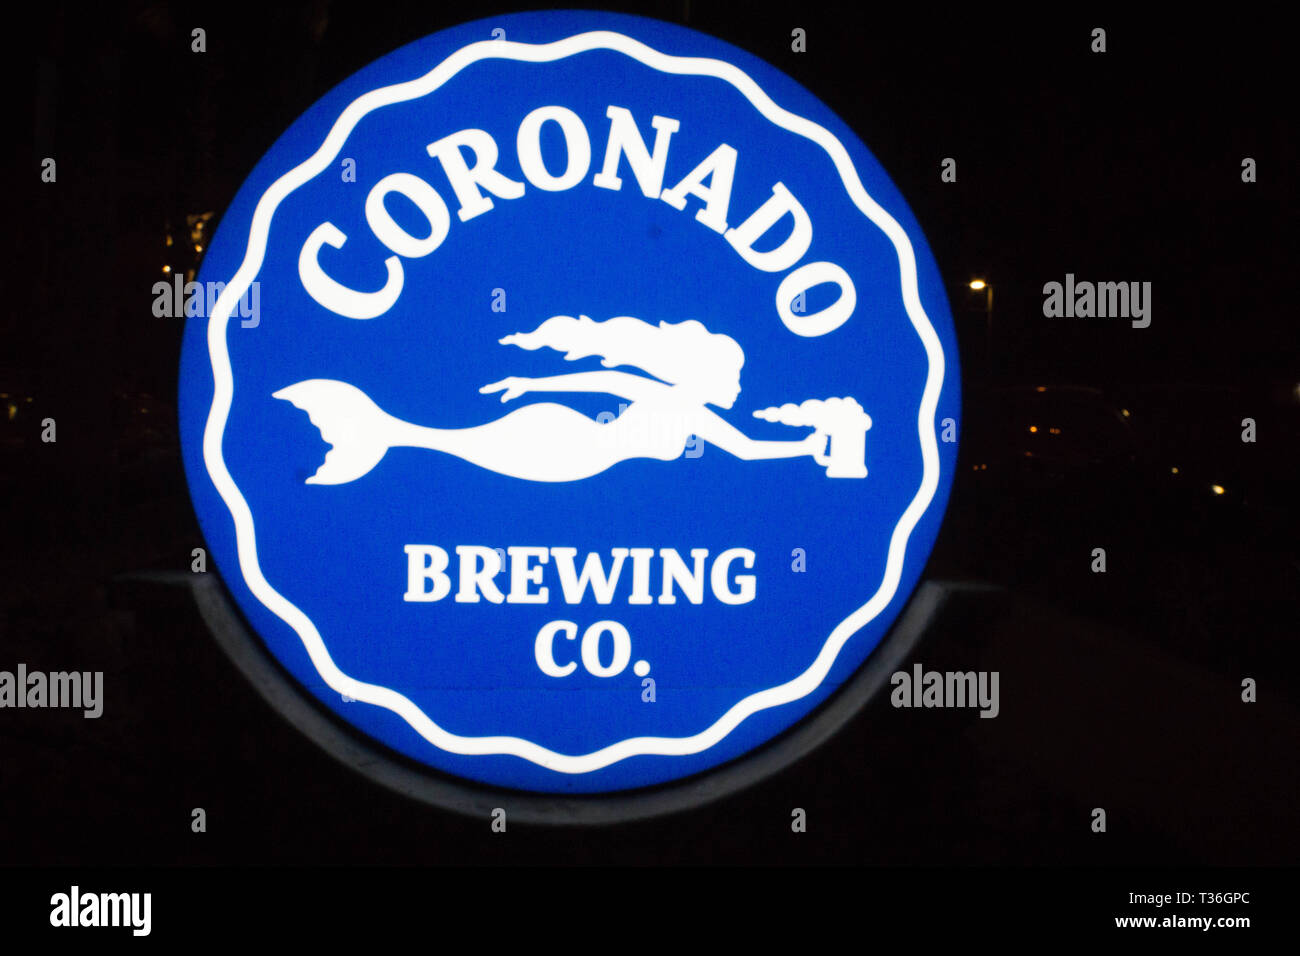 San Diego, CA / USA - July 24, 2018: A restaurant sign for the Coronado Brewing Co. in San Diego. Stock Photo